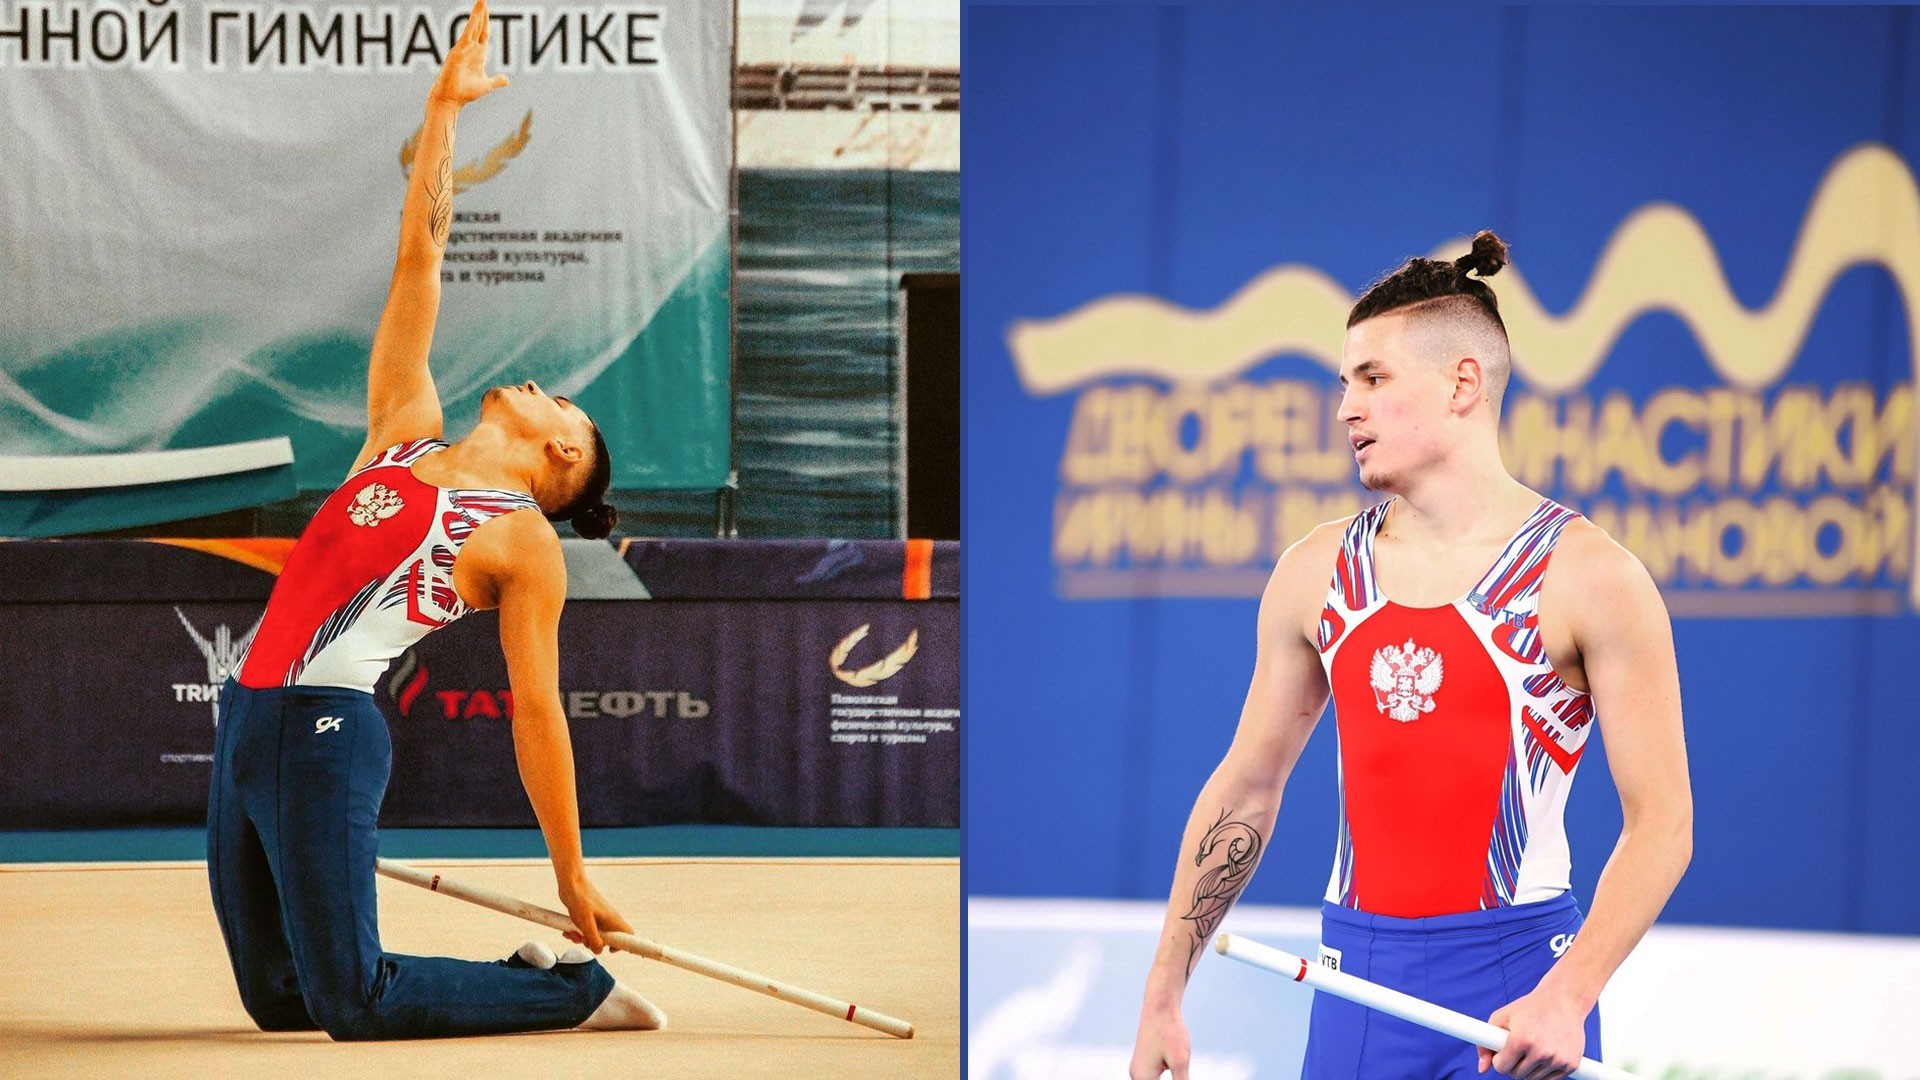 Men's rhythmic gymnastics is on the rise in Russia - despite the